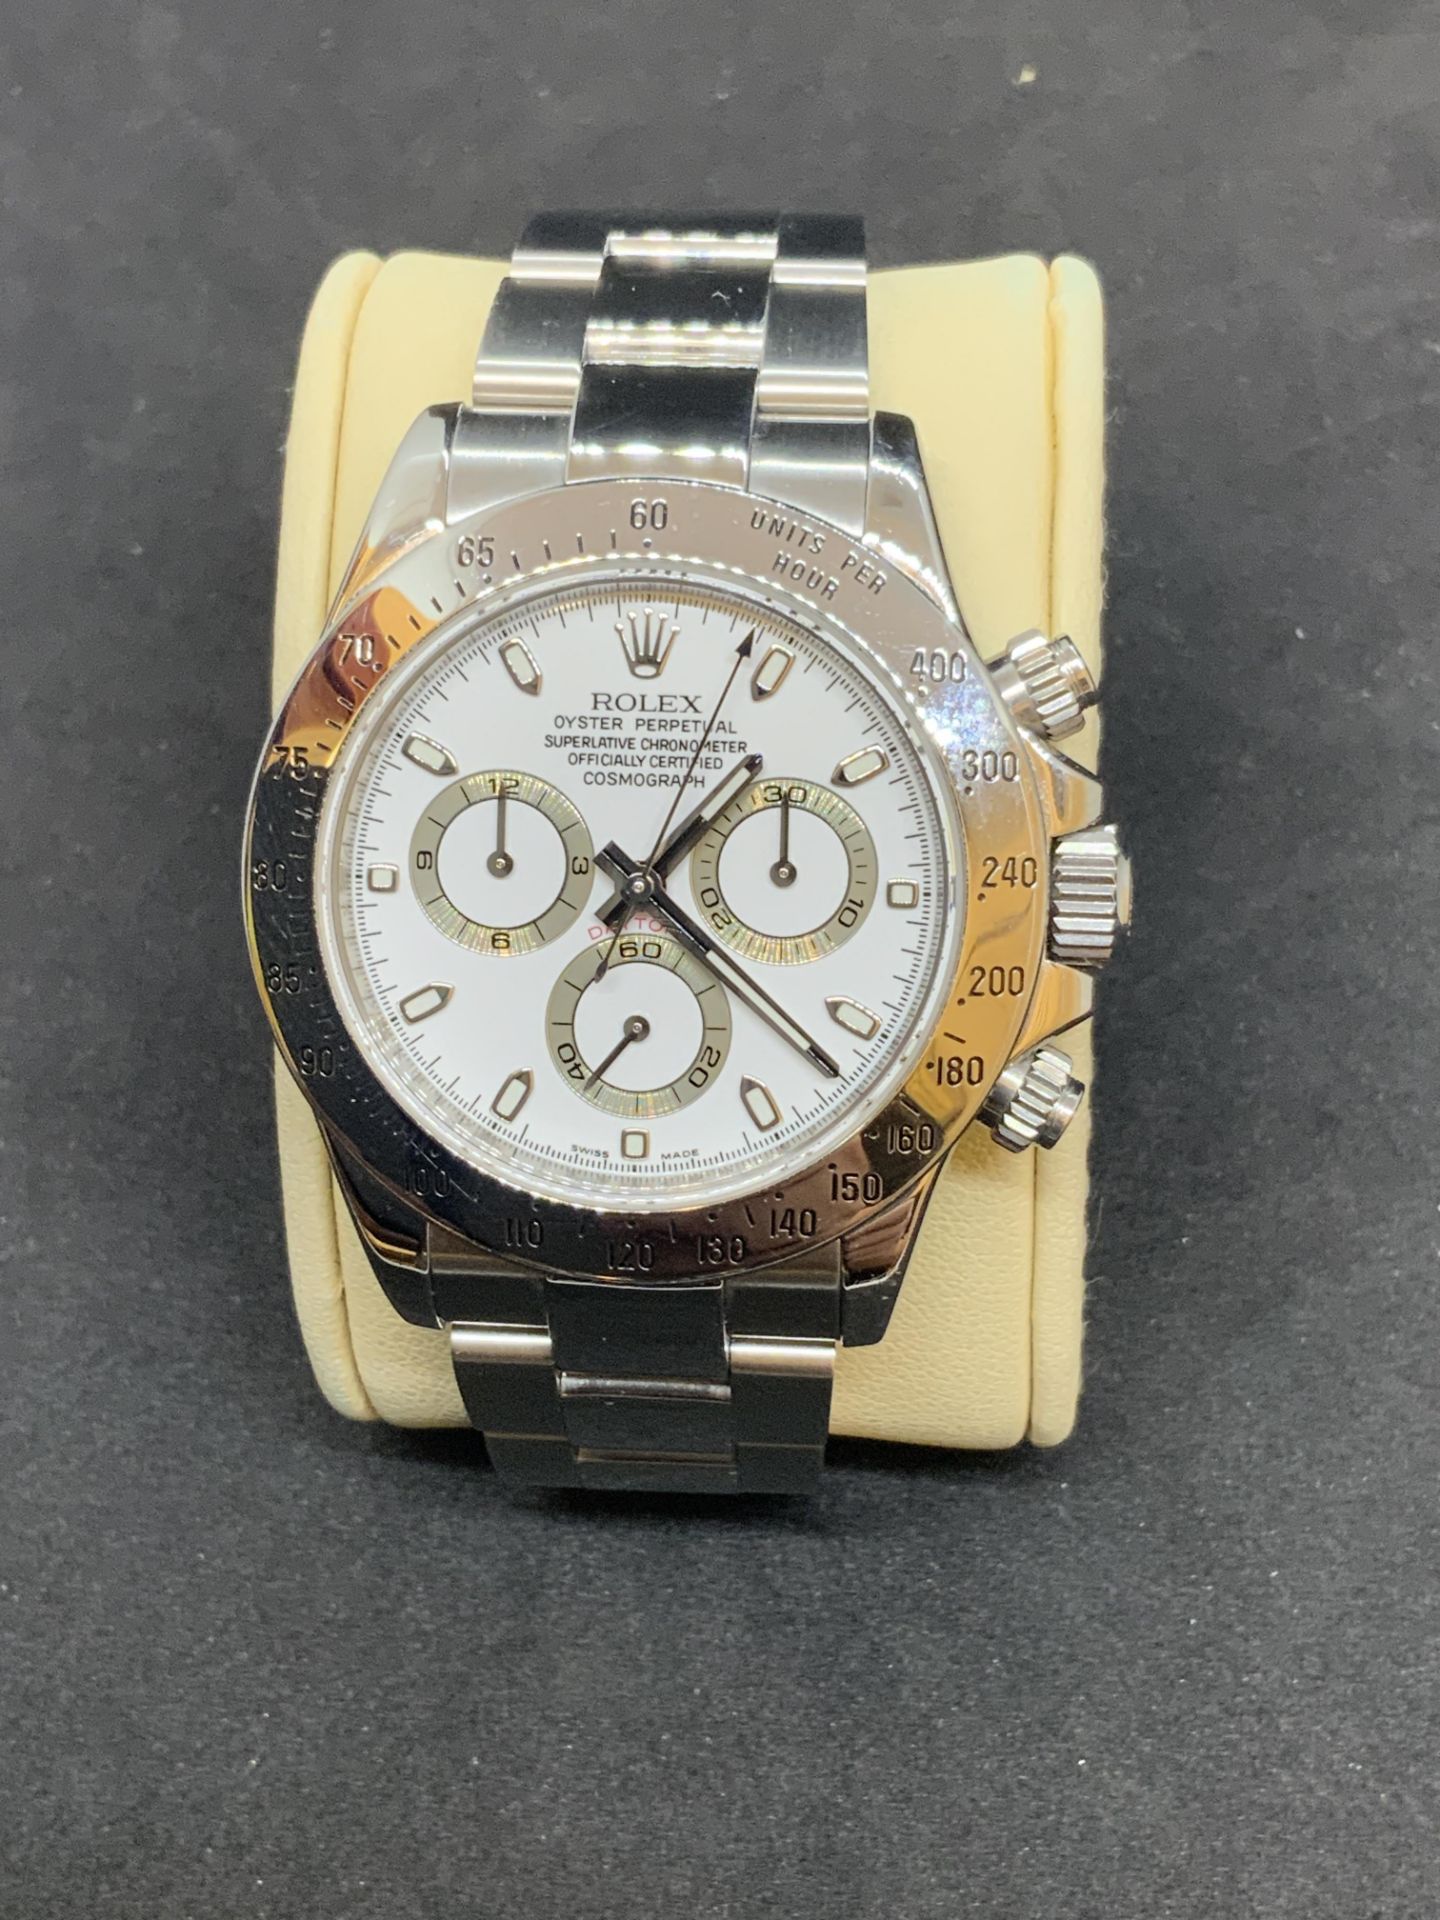 2008 ROLEX DAYTONA S/STEEL WITH ROLEX PAPERS 116520 - WHITE DIAL - Image 9 of 11